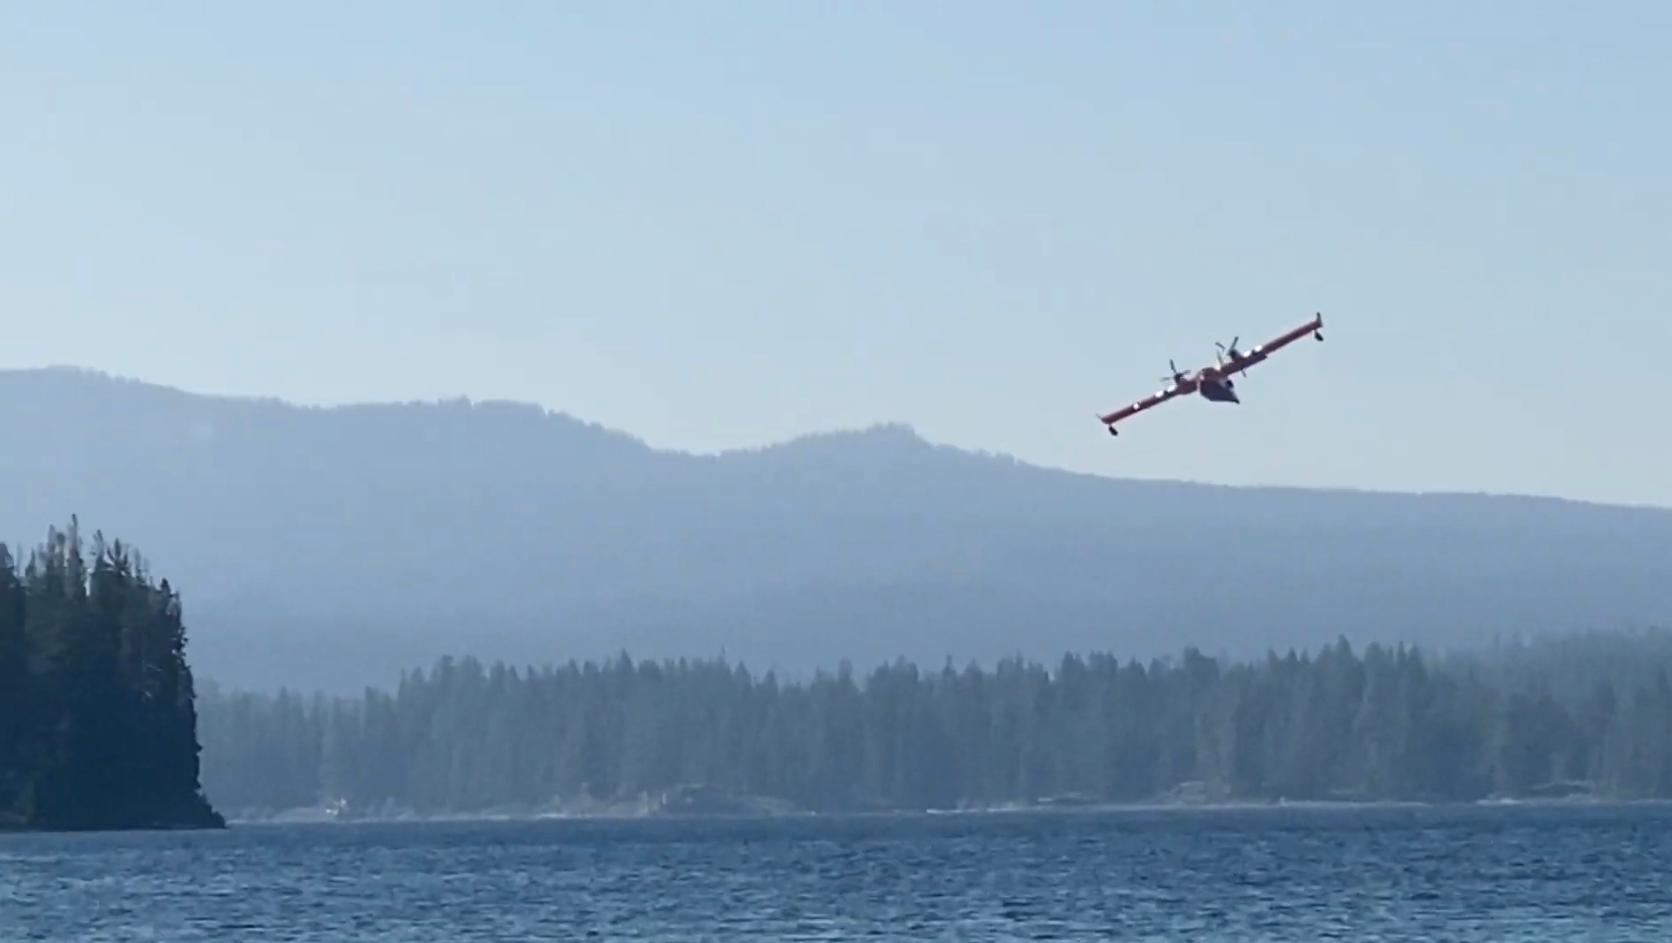 A large yellow aircraft is taking off from a Lake surrounded by a mixed conifer forest